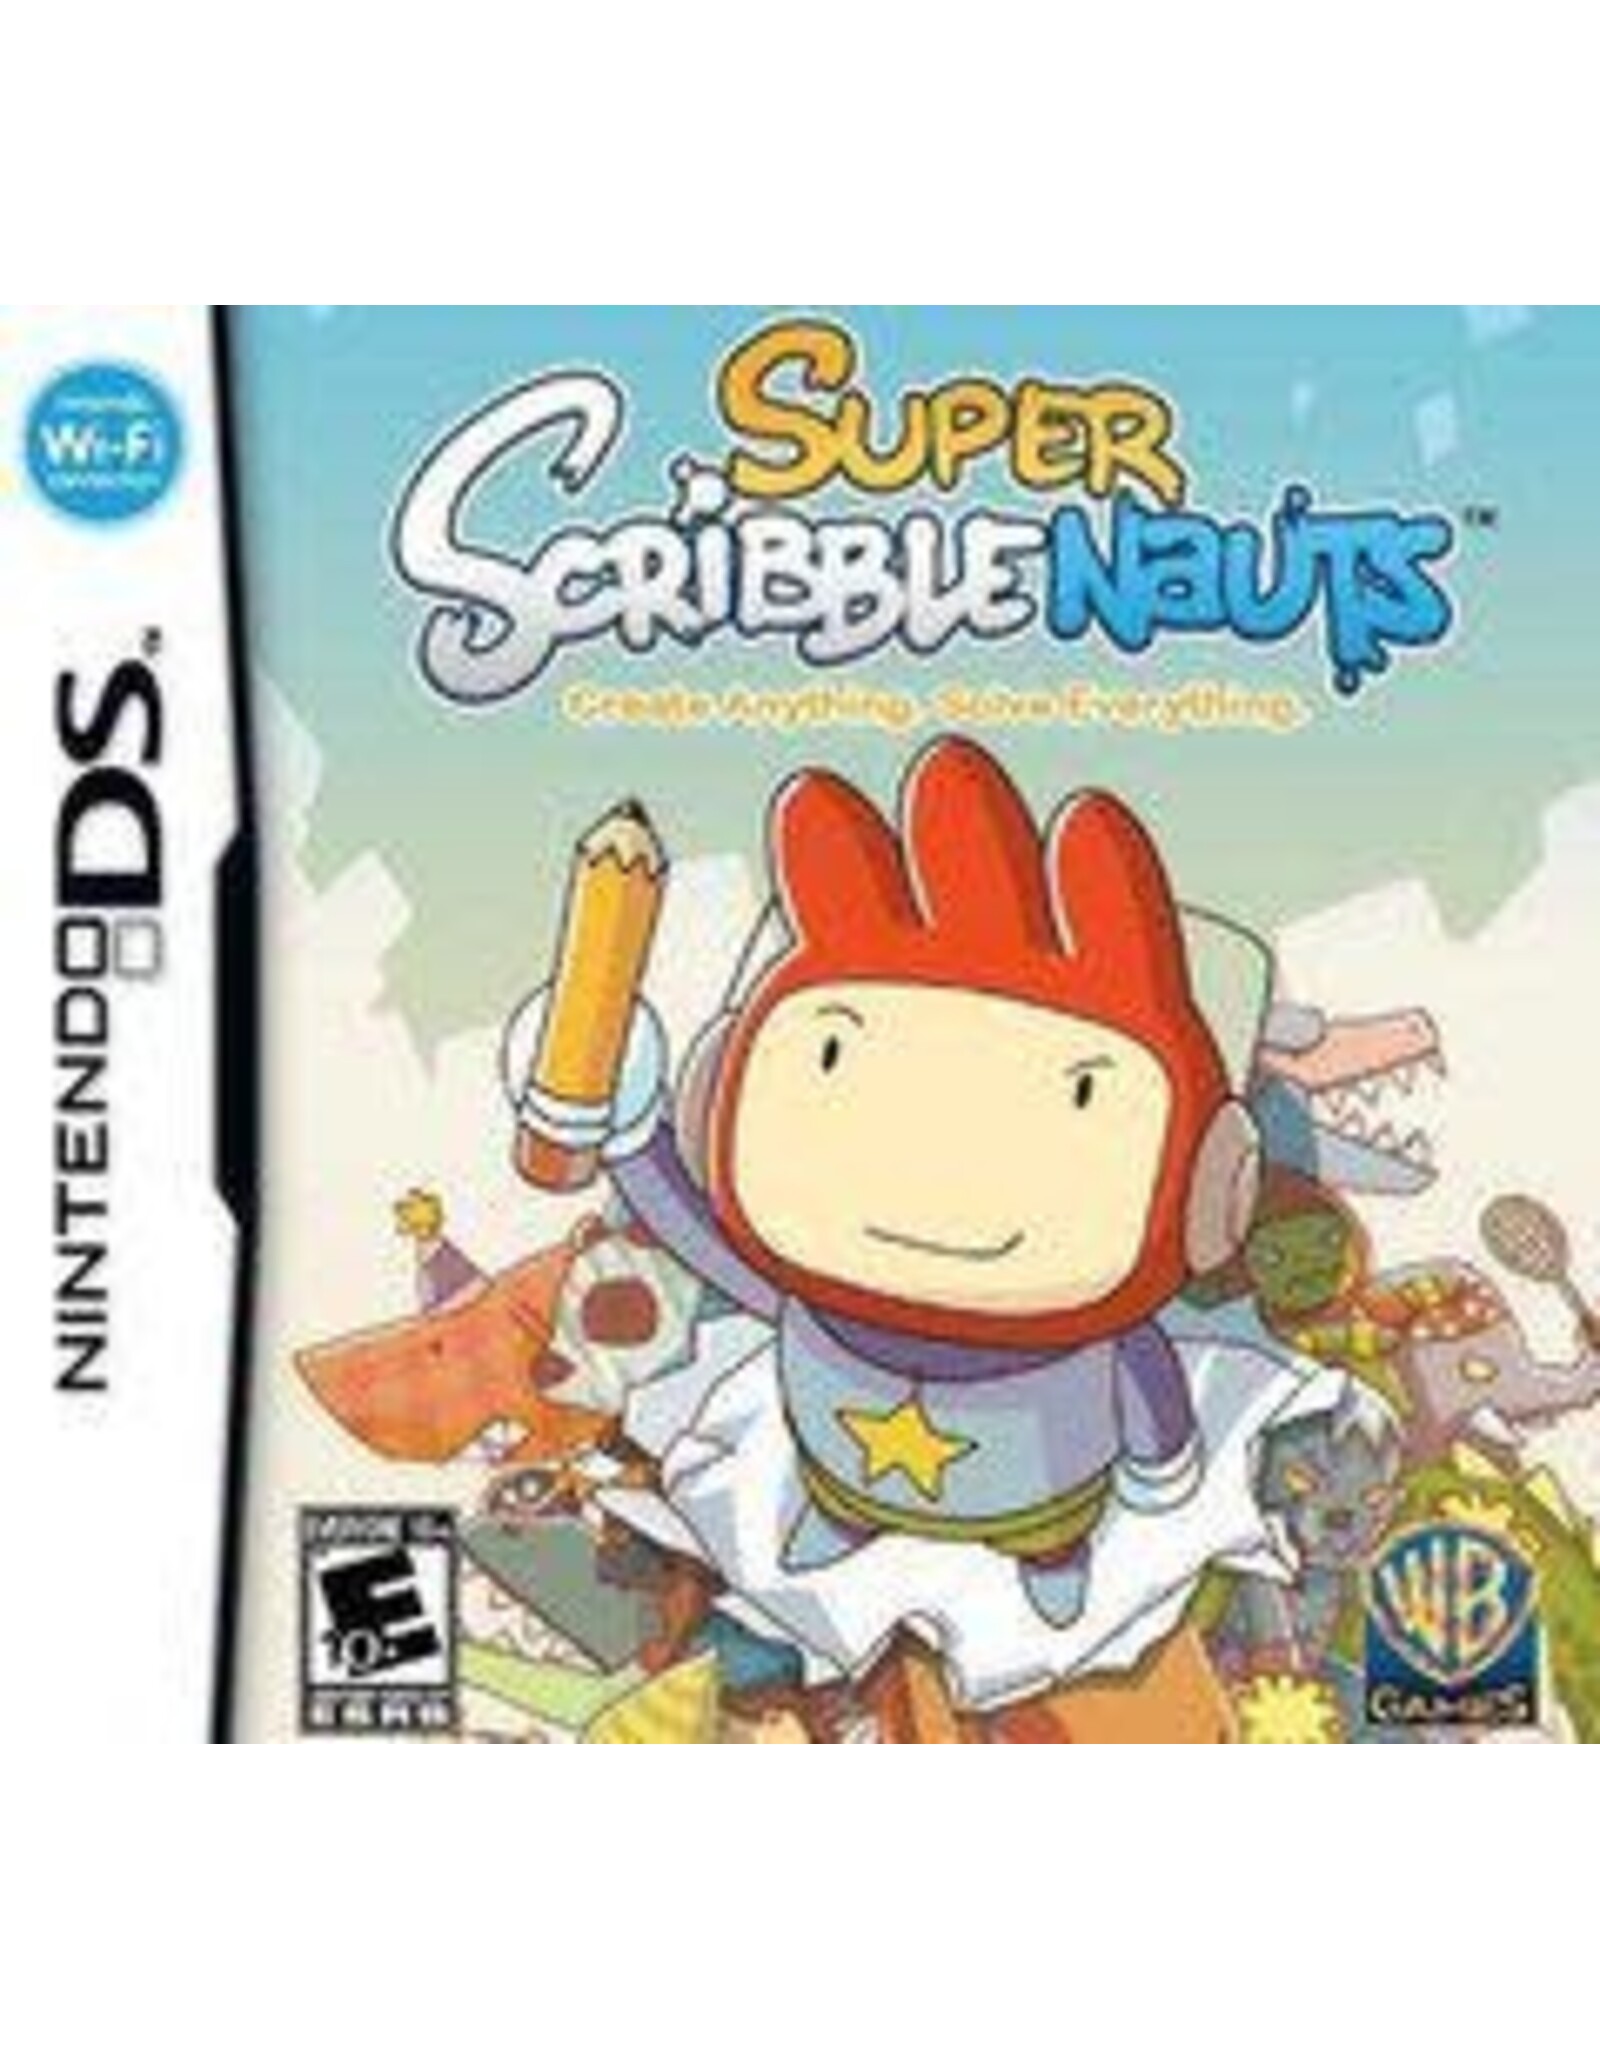 Nintendo DS Super Scribblenauts (Used, Cart Only)